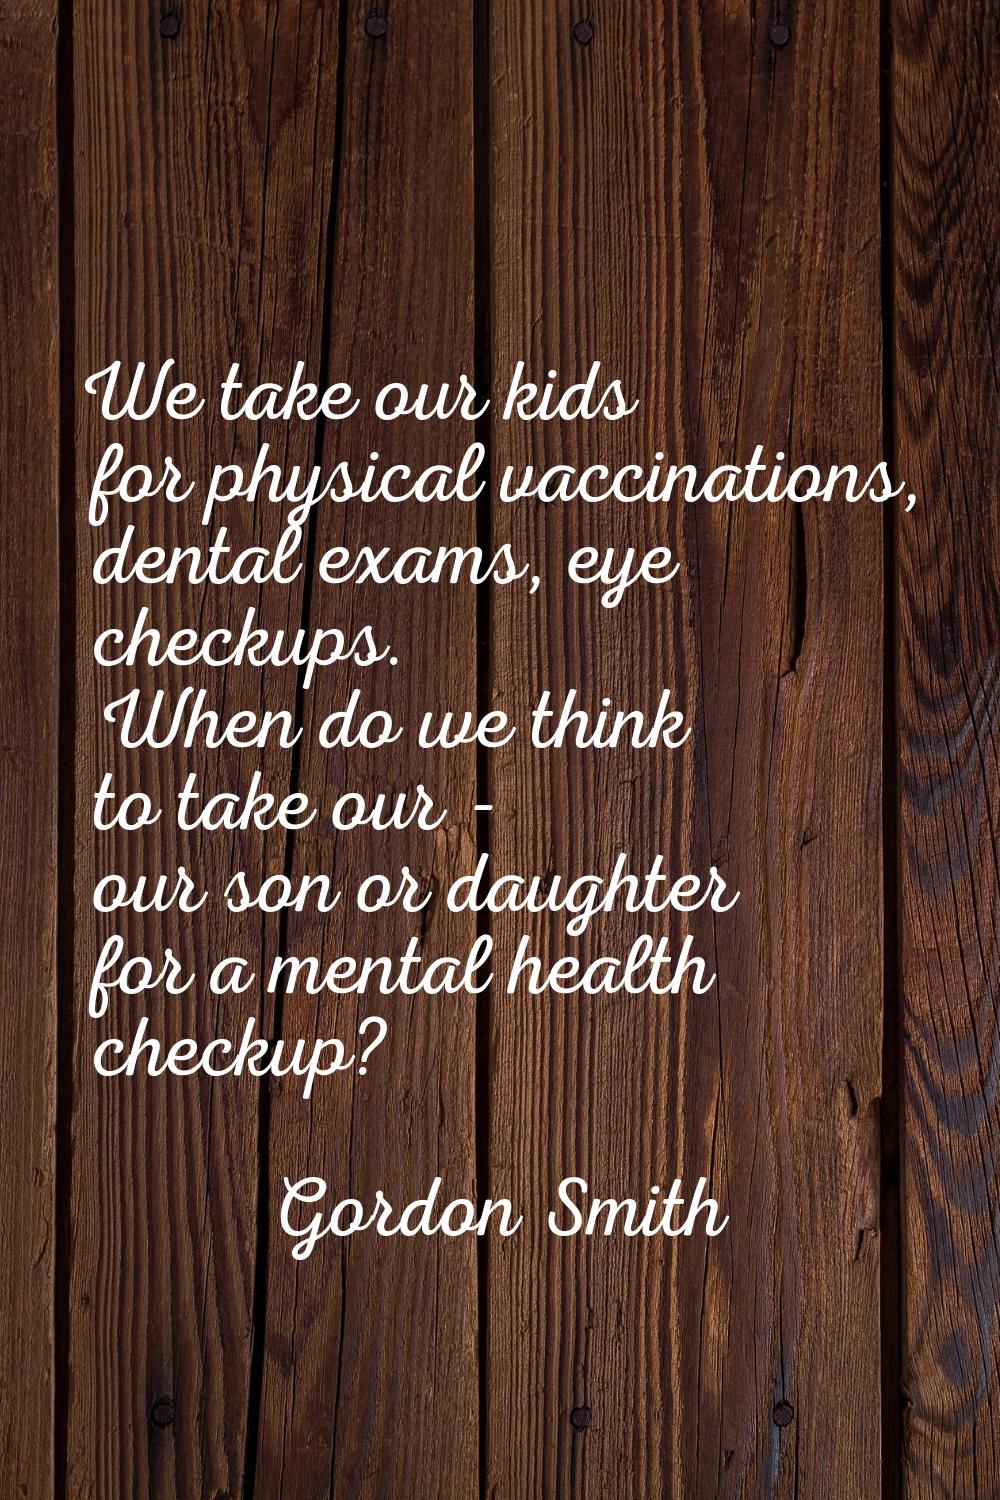 We take our kids for physical vaccinations, dental exams, eye checkups. When do we think to take ou